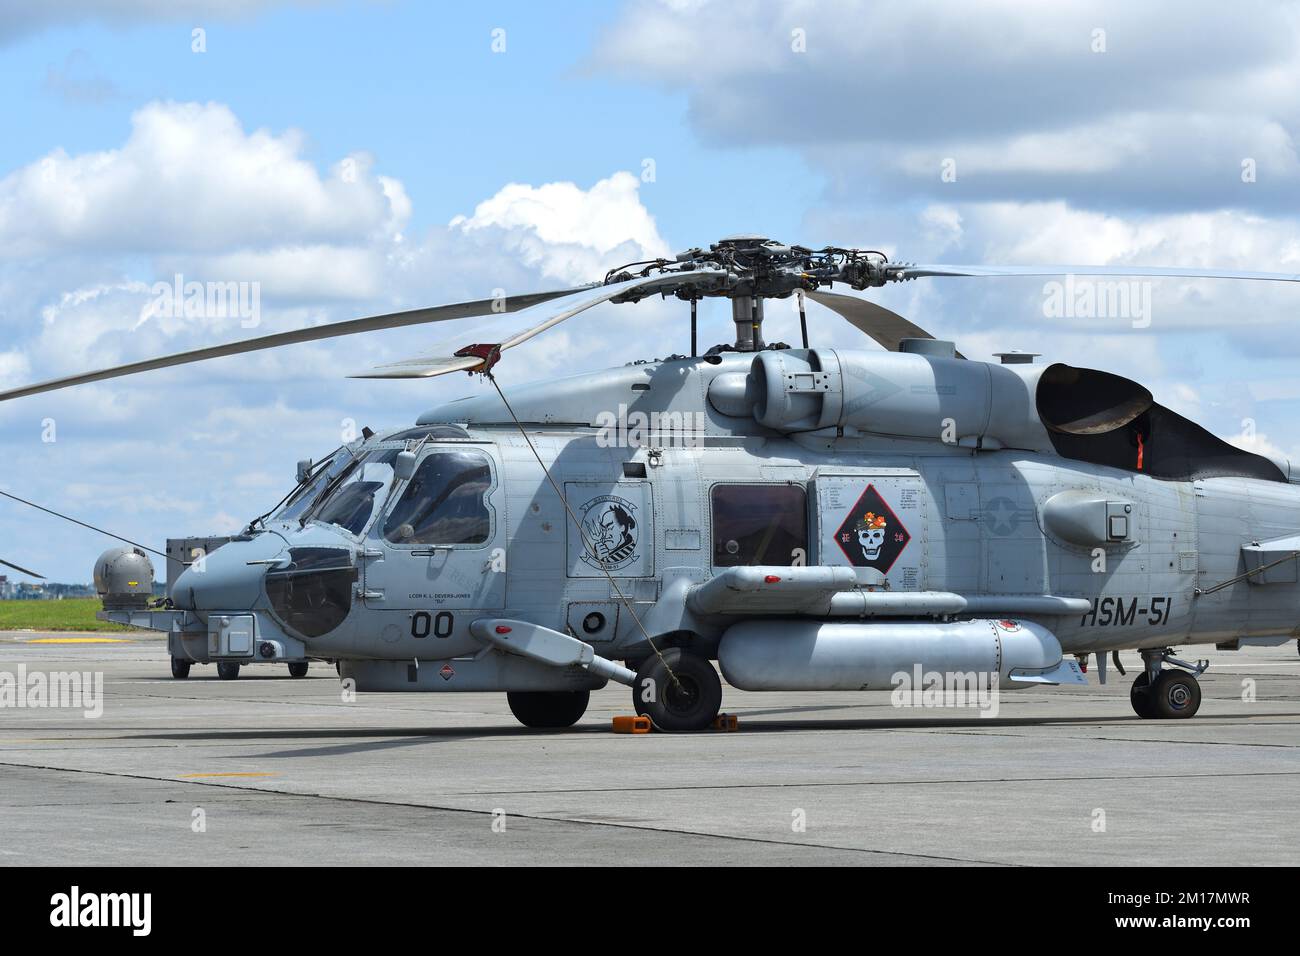 Tokyo, Japan - May 22, 2022: United States Navy Sikorsky MH-60R Seahawk utility maritime helicopter from HSM-51 Warlords. Stock Photo